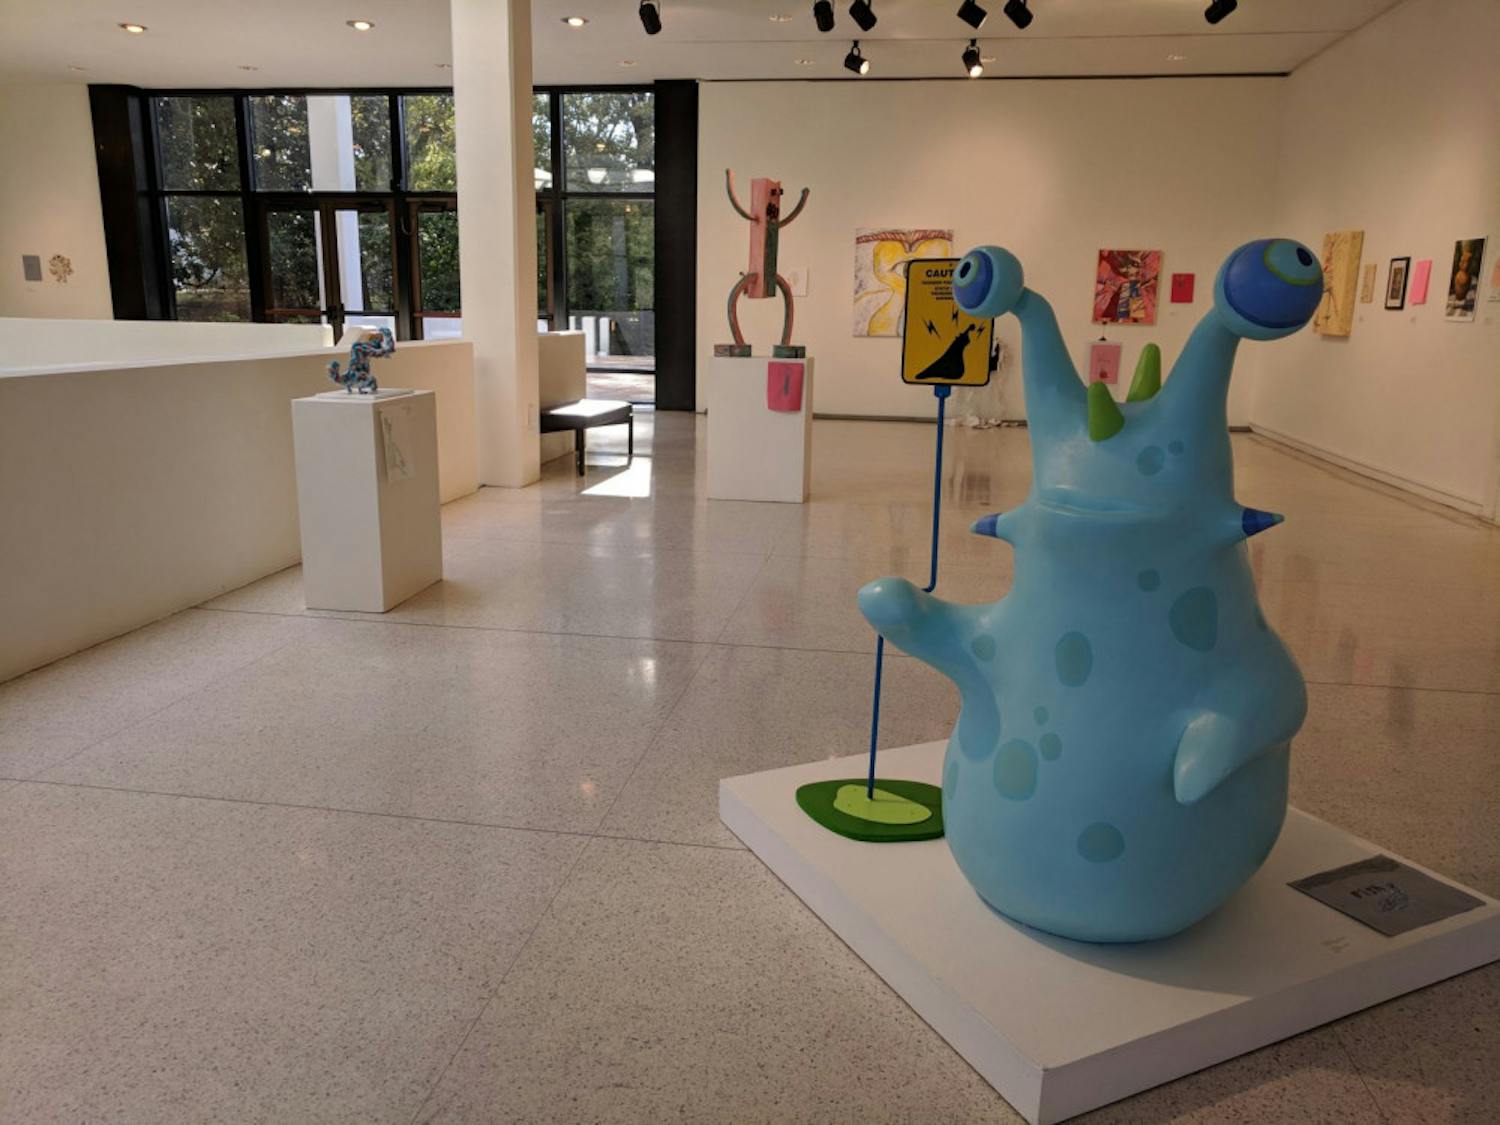 "Le Monster Part Boo" at Memphis College of Art